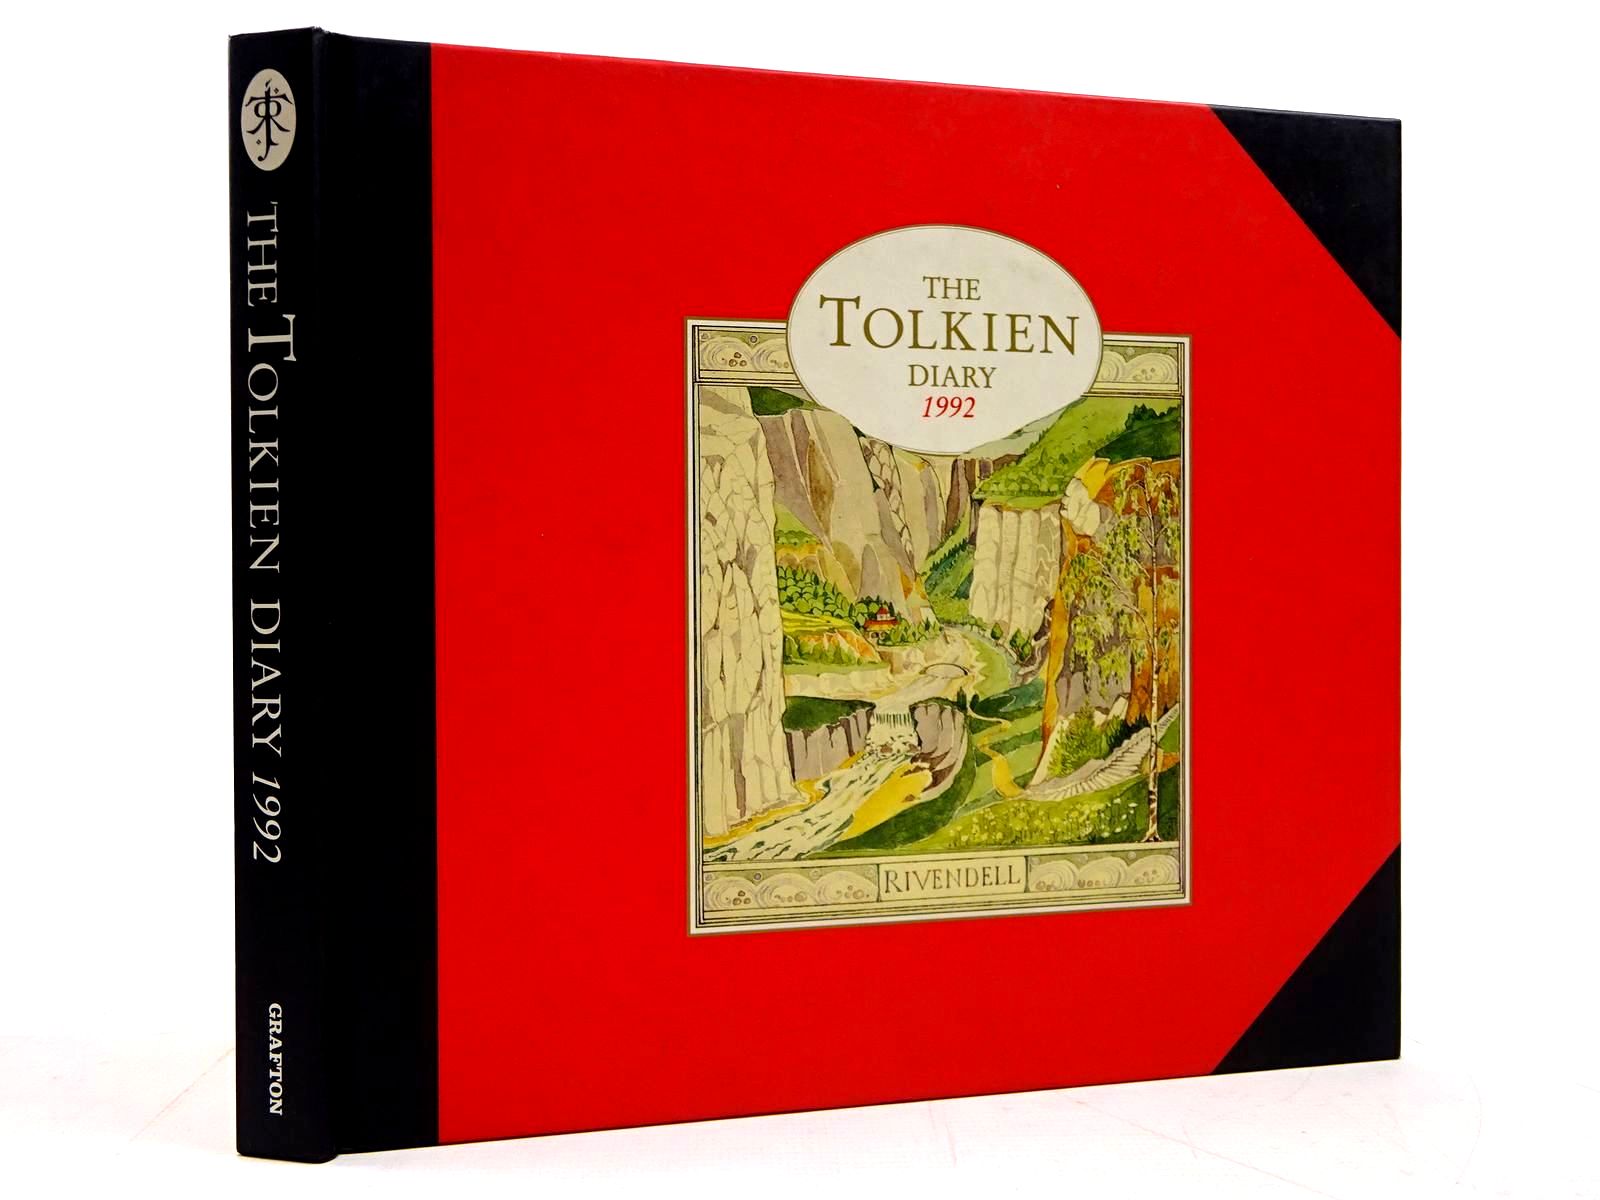 TOLKIEN, J.R.R. ILLUSTRATED BY TOLKIEN, J.R.R. - The Tolkien Diary 1992